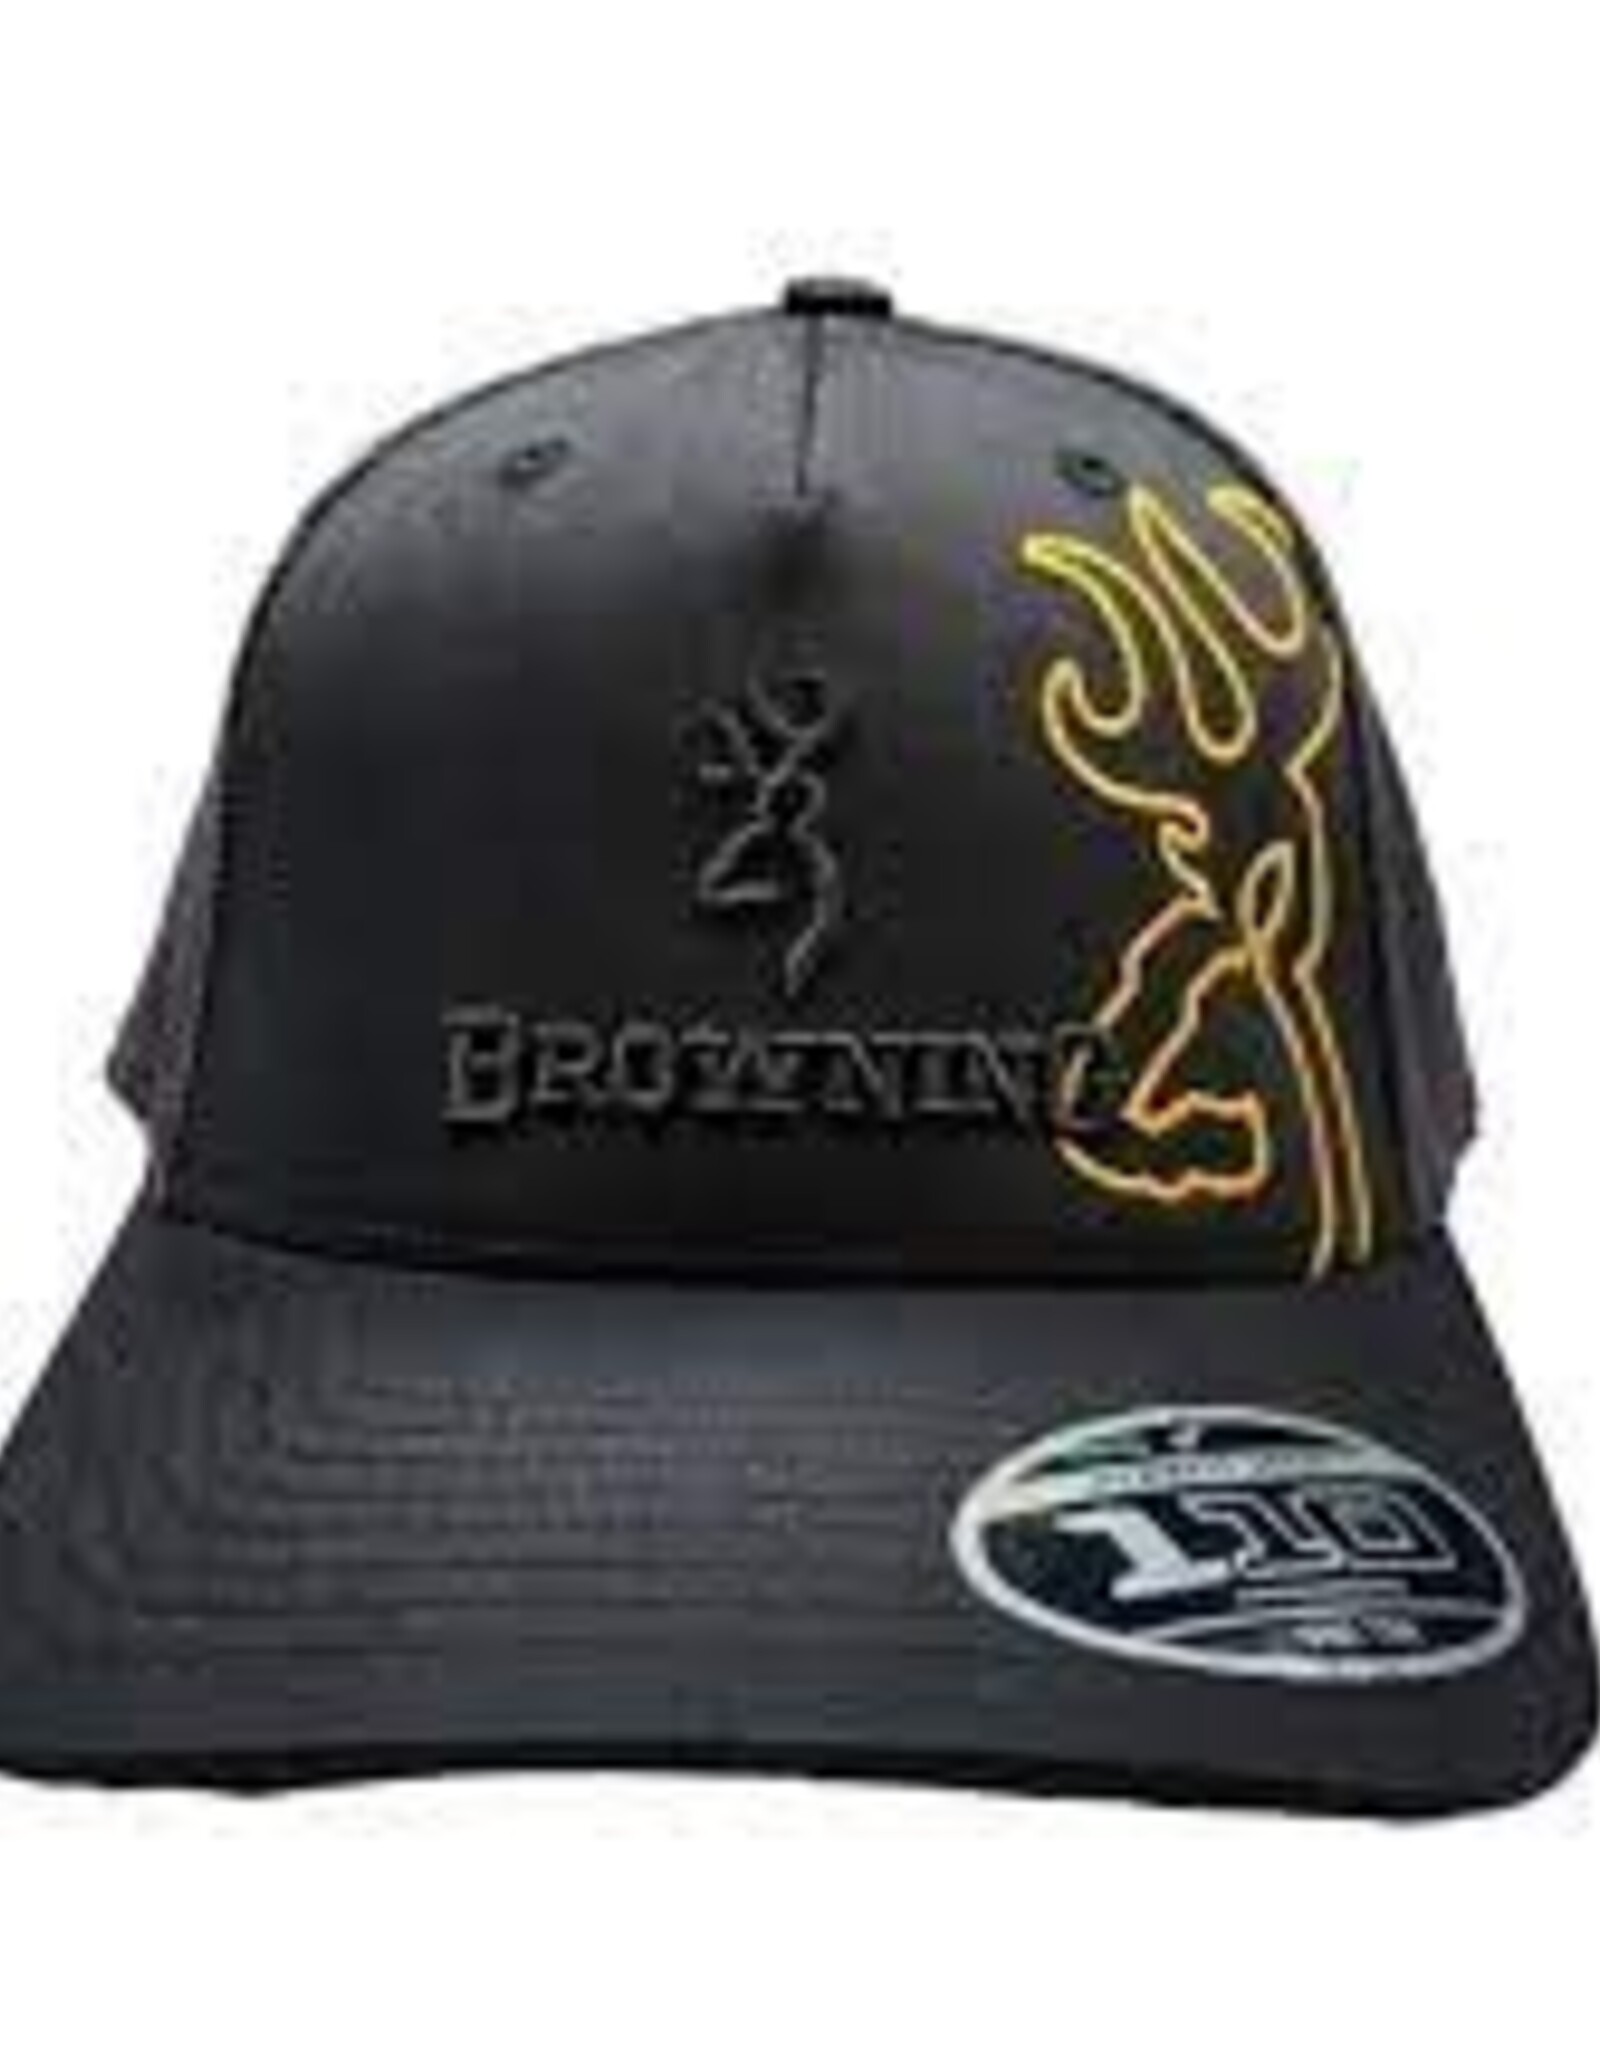 Browning Junction Cap Shot Show Special Only